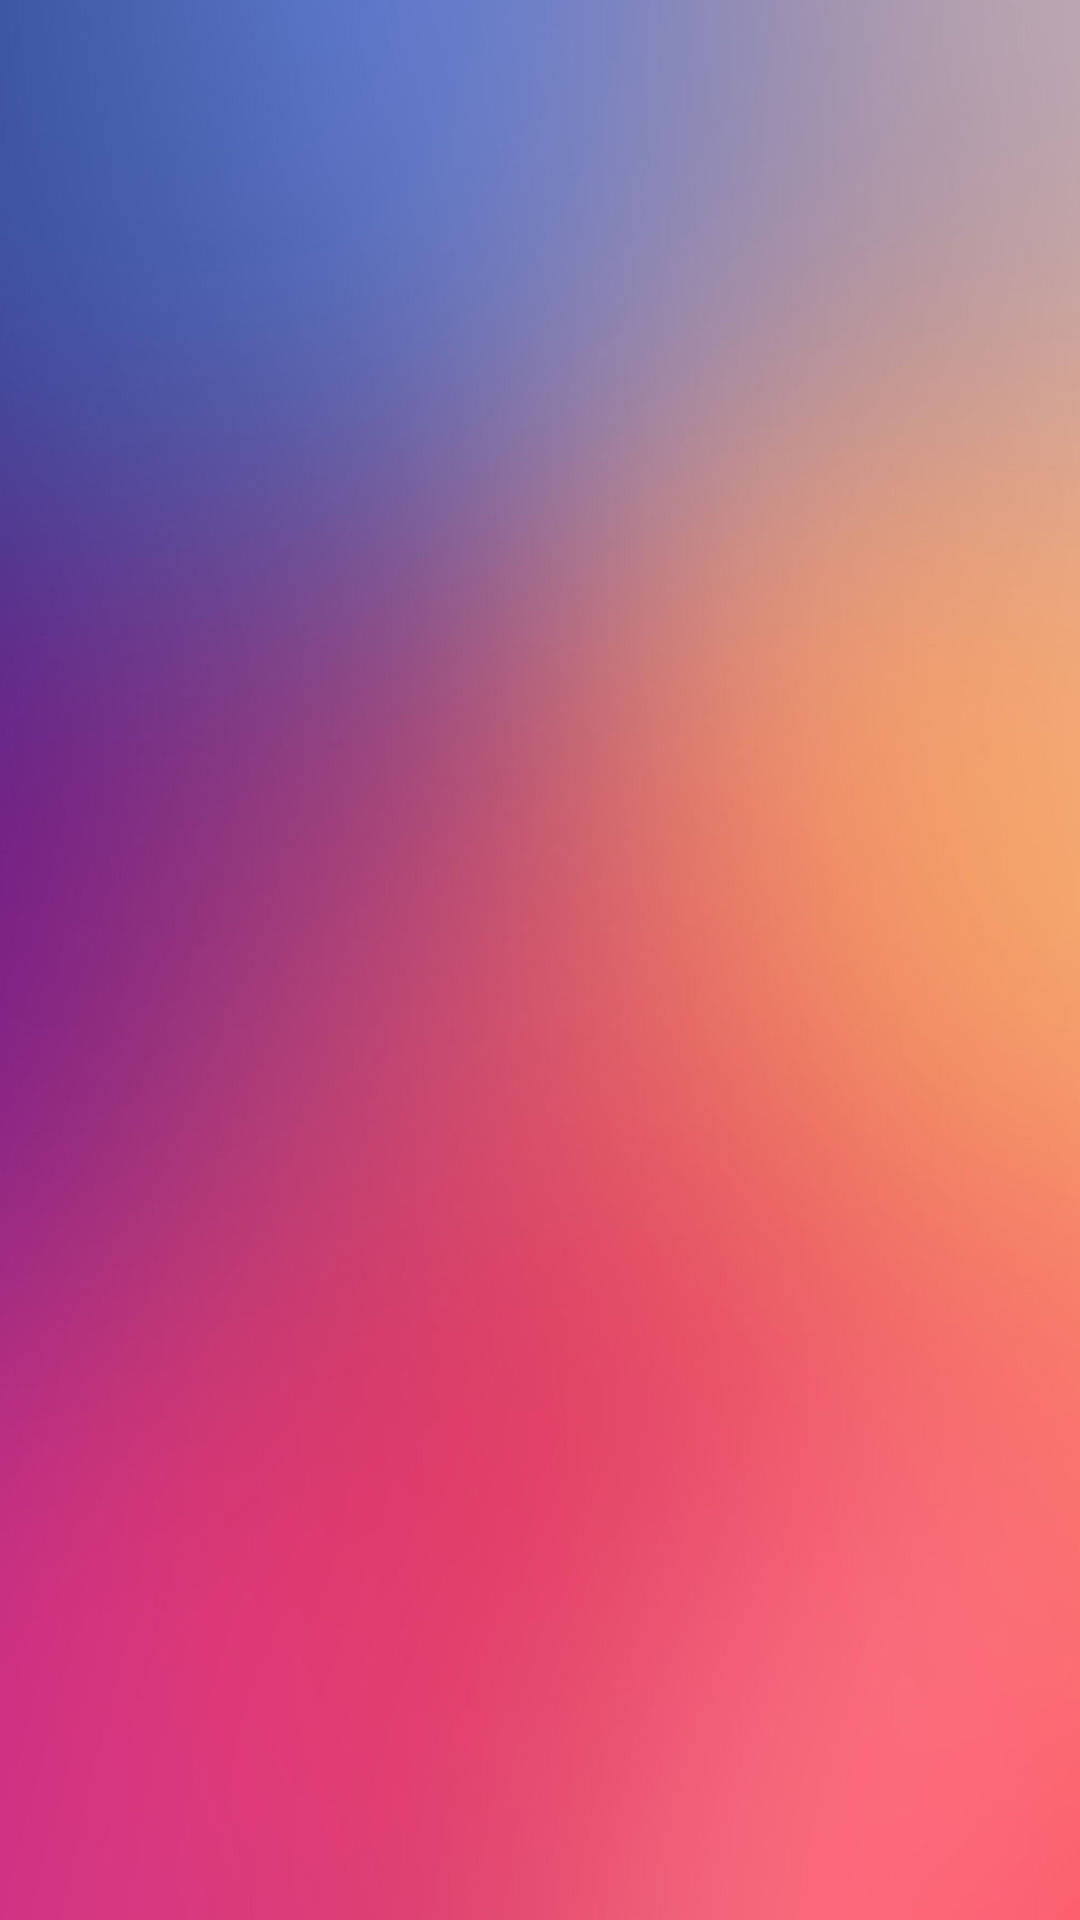 Gradient Blurred Pink Oppo A5s Wallpaper